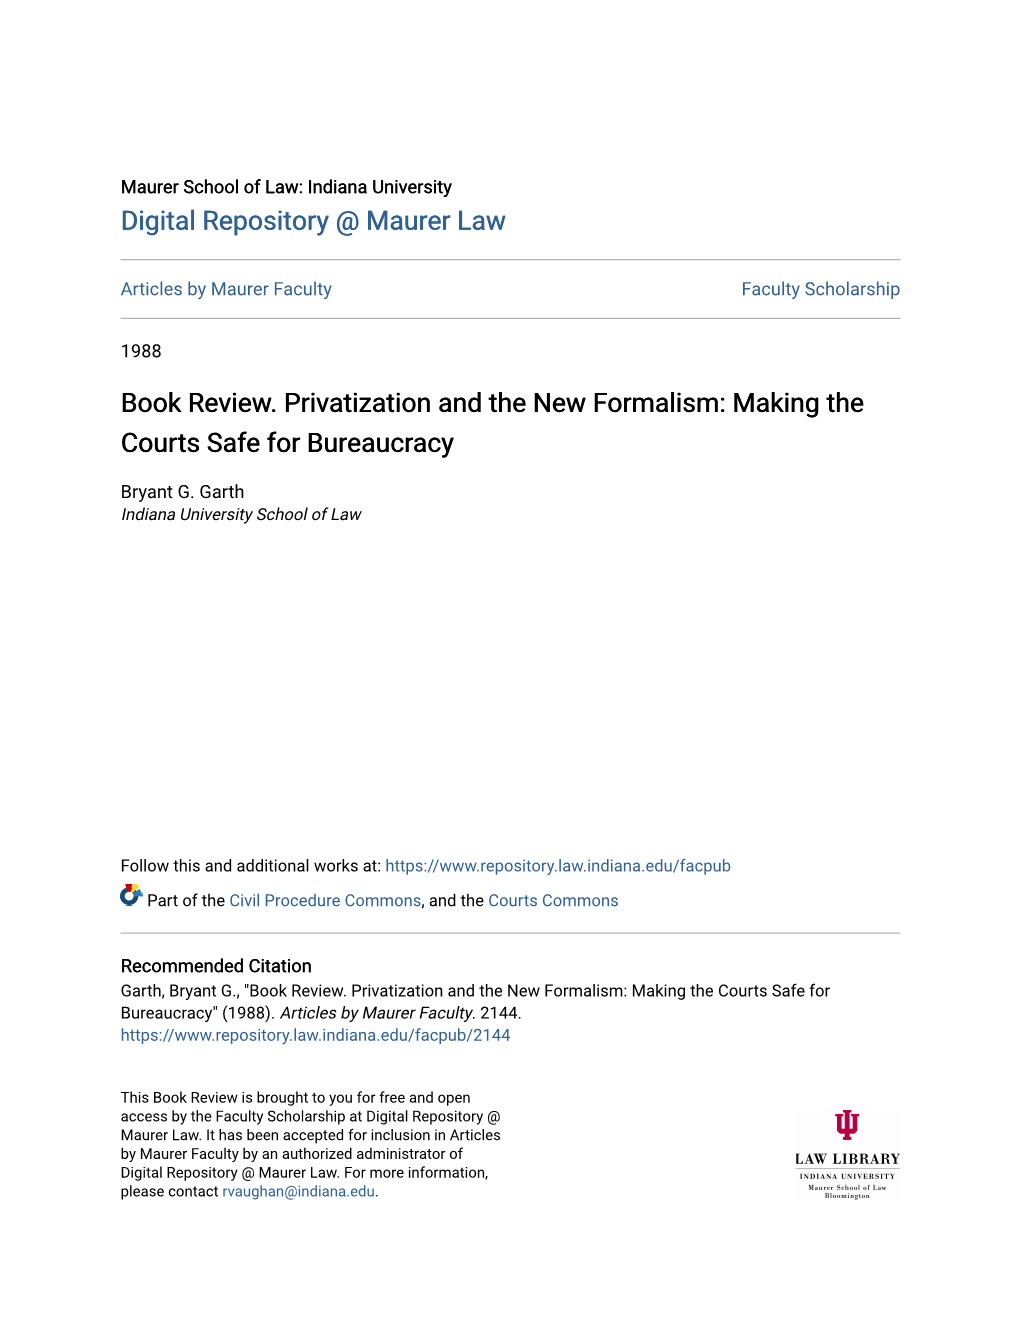 Book Review. Privatization and the New Formalism: Making the Courts Safe for Bureaucracy